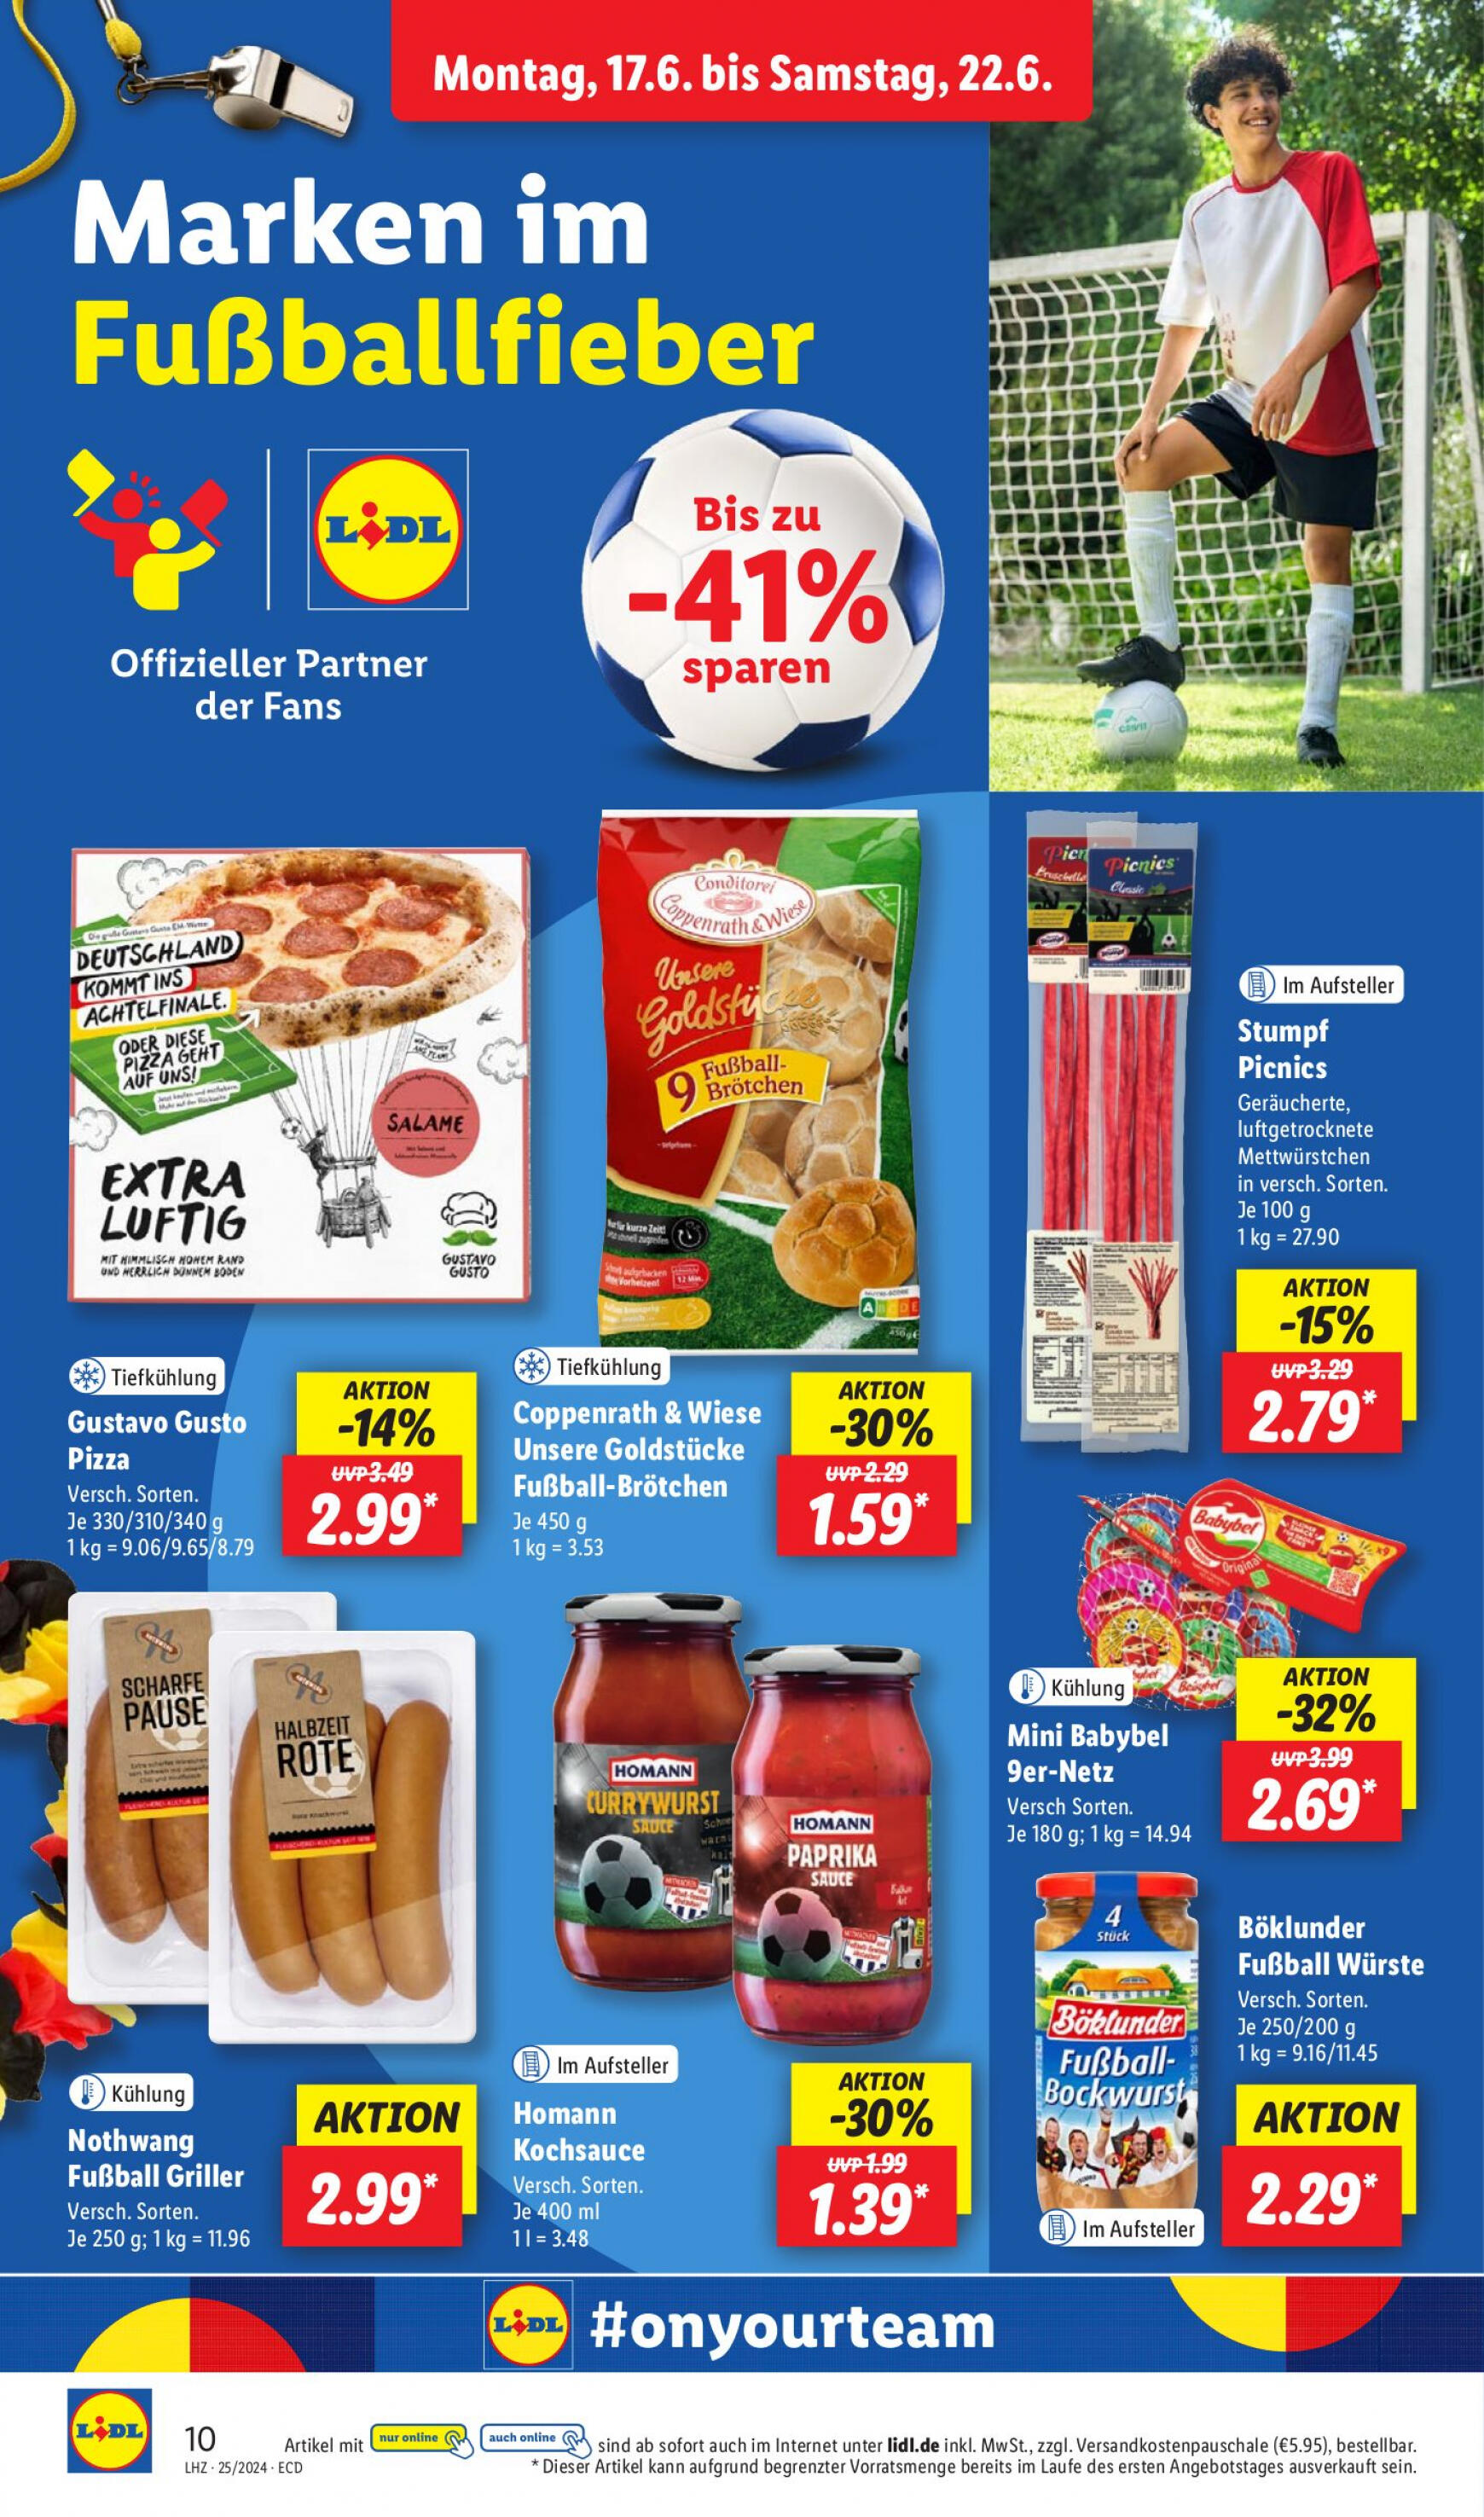 lidl - Flyer Lidl aktuell 17.06. - 22.06. - page: 14